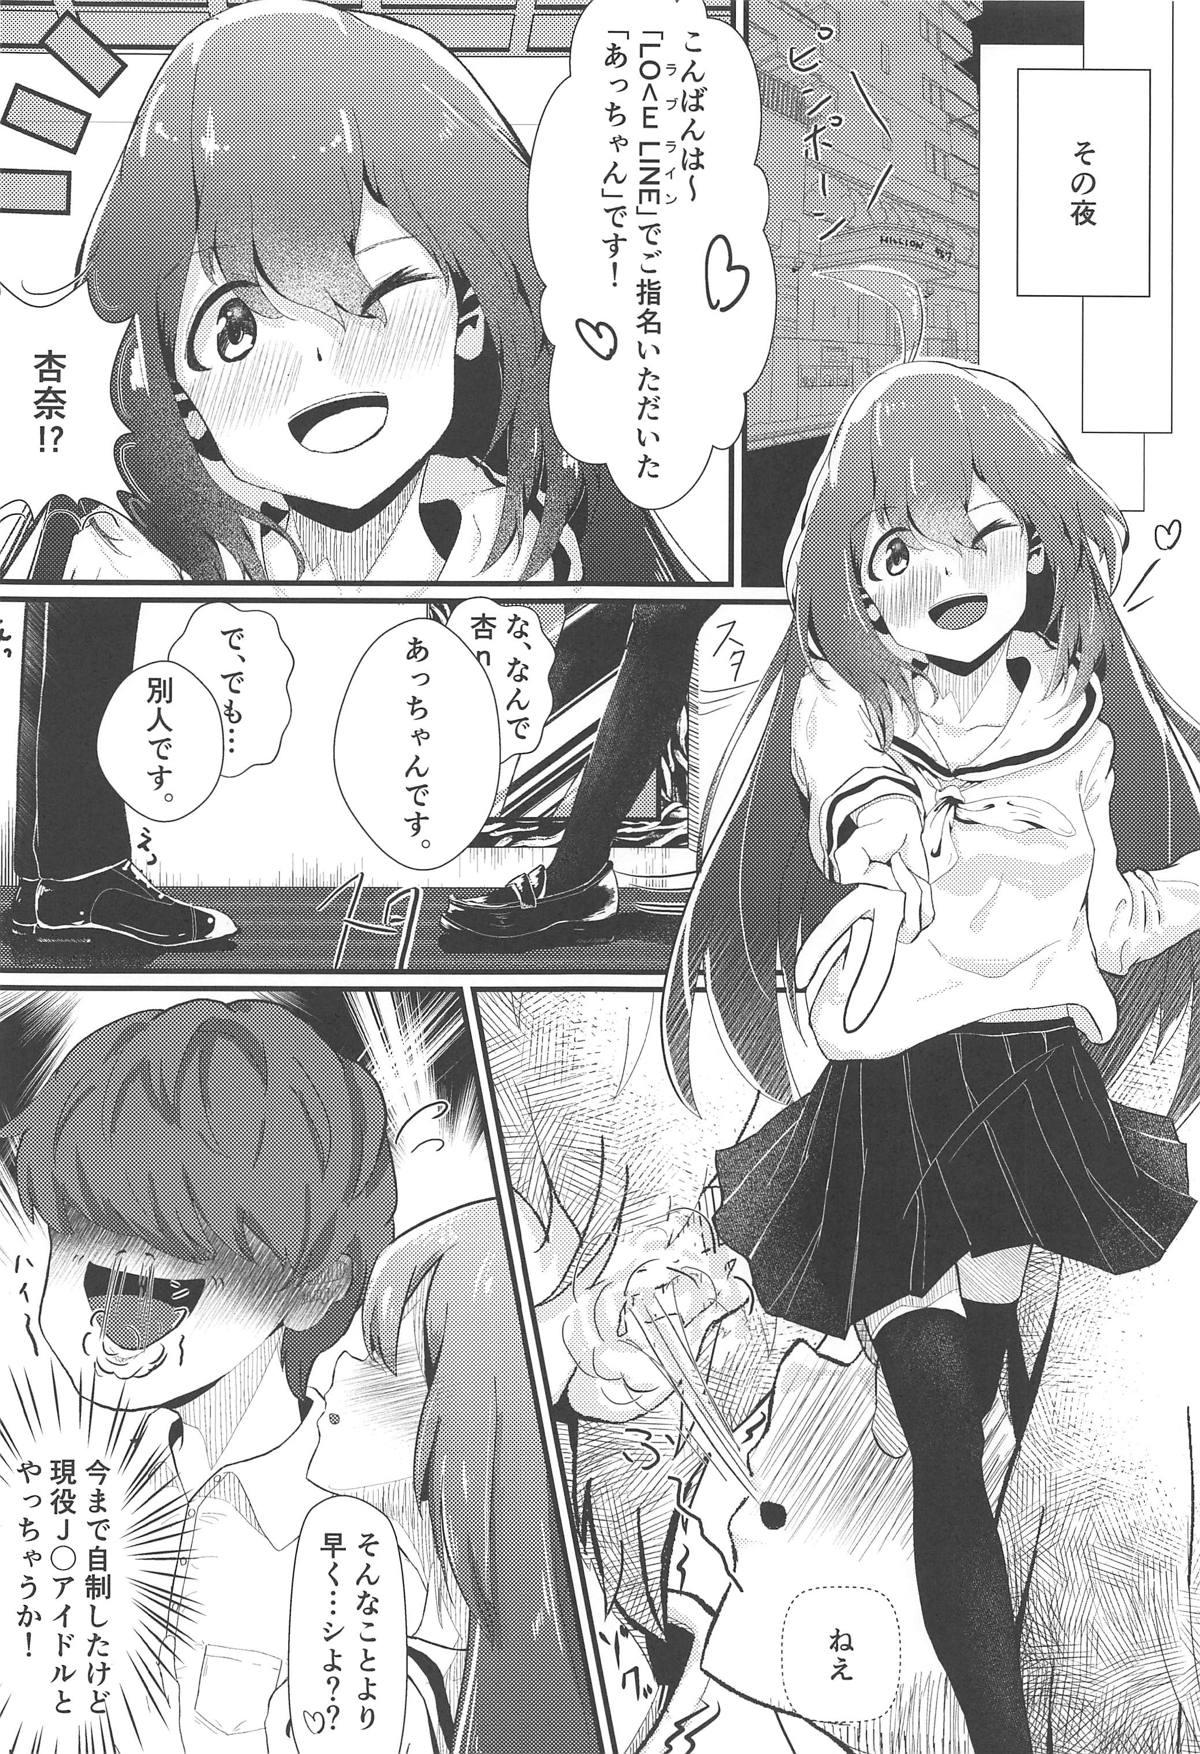 Cheating Wife Annax! - The idolmaster Shaking - Page 4